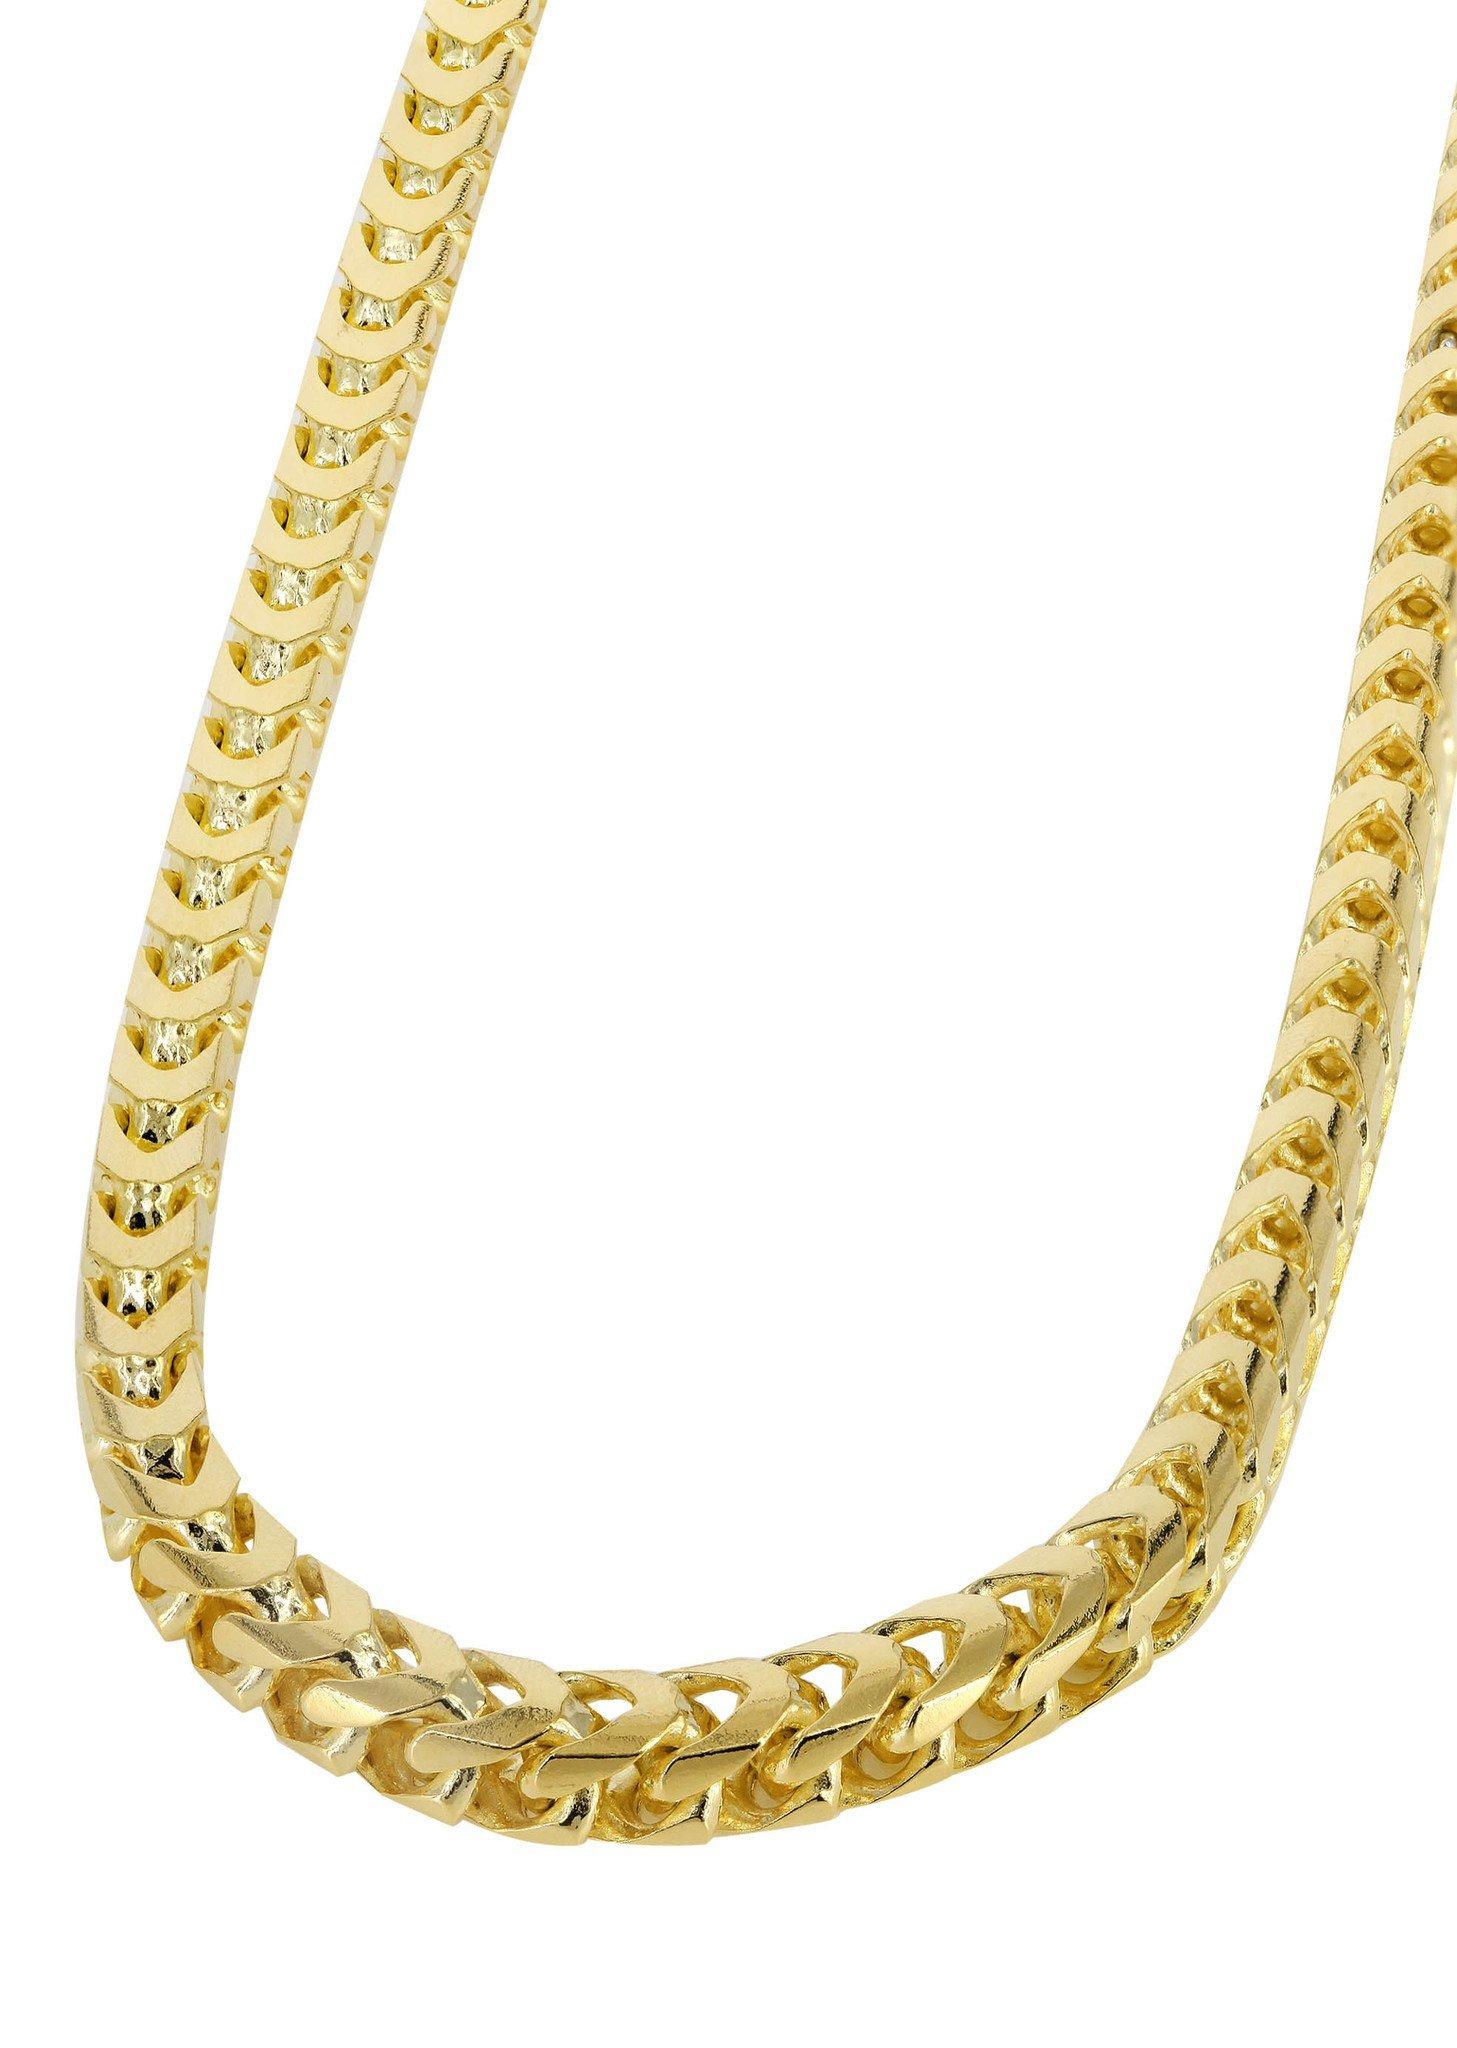 Vintage 14 Karat Yellow Gold 25 Gm
 2.4 mm wide Franco Chain Necklace,  
27 Inches long Necklace
Made in Italy 
stamped f0r 585 and 14 K and Italy


Please look at all the pictures
Its very hard to capture the true color and luster of the Necklace ,